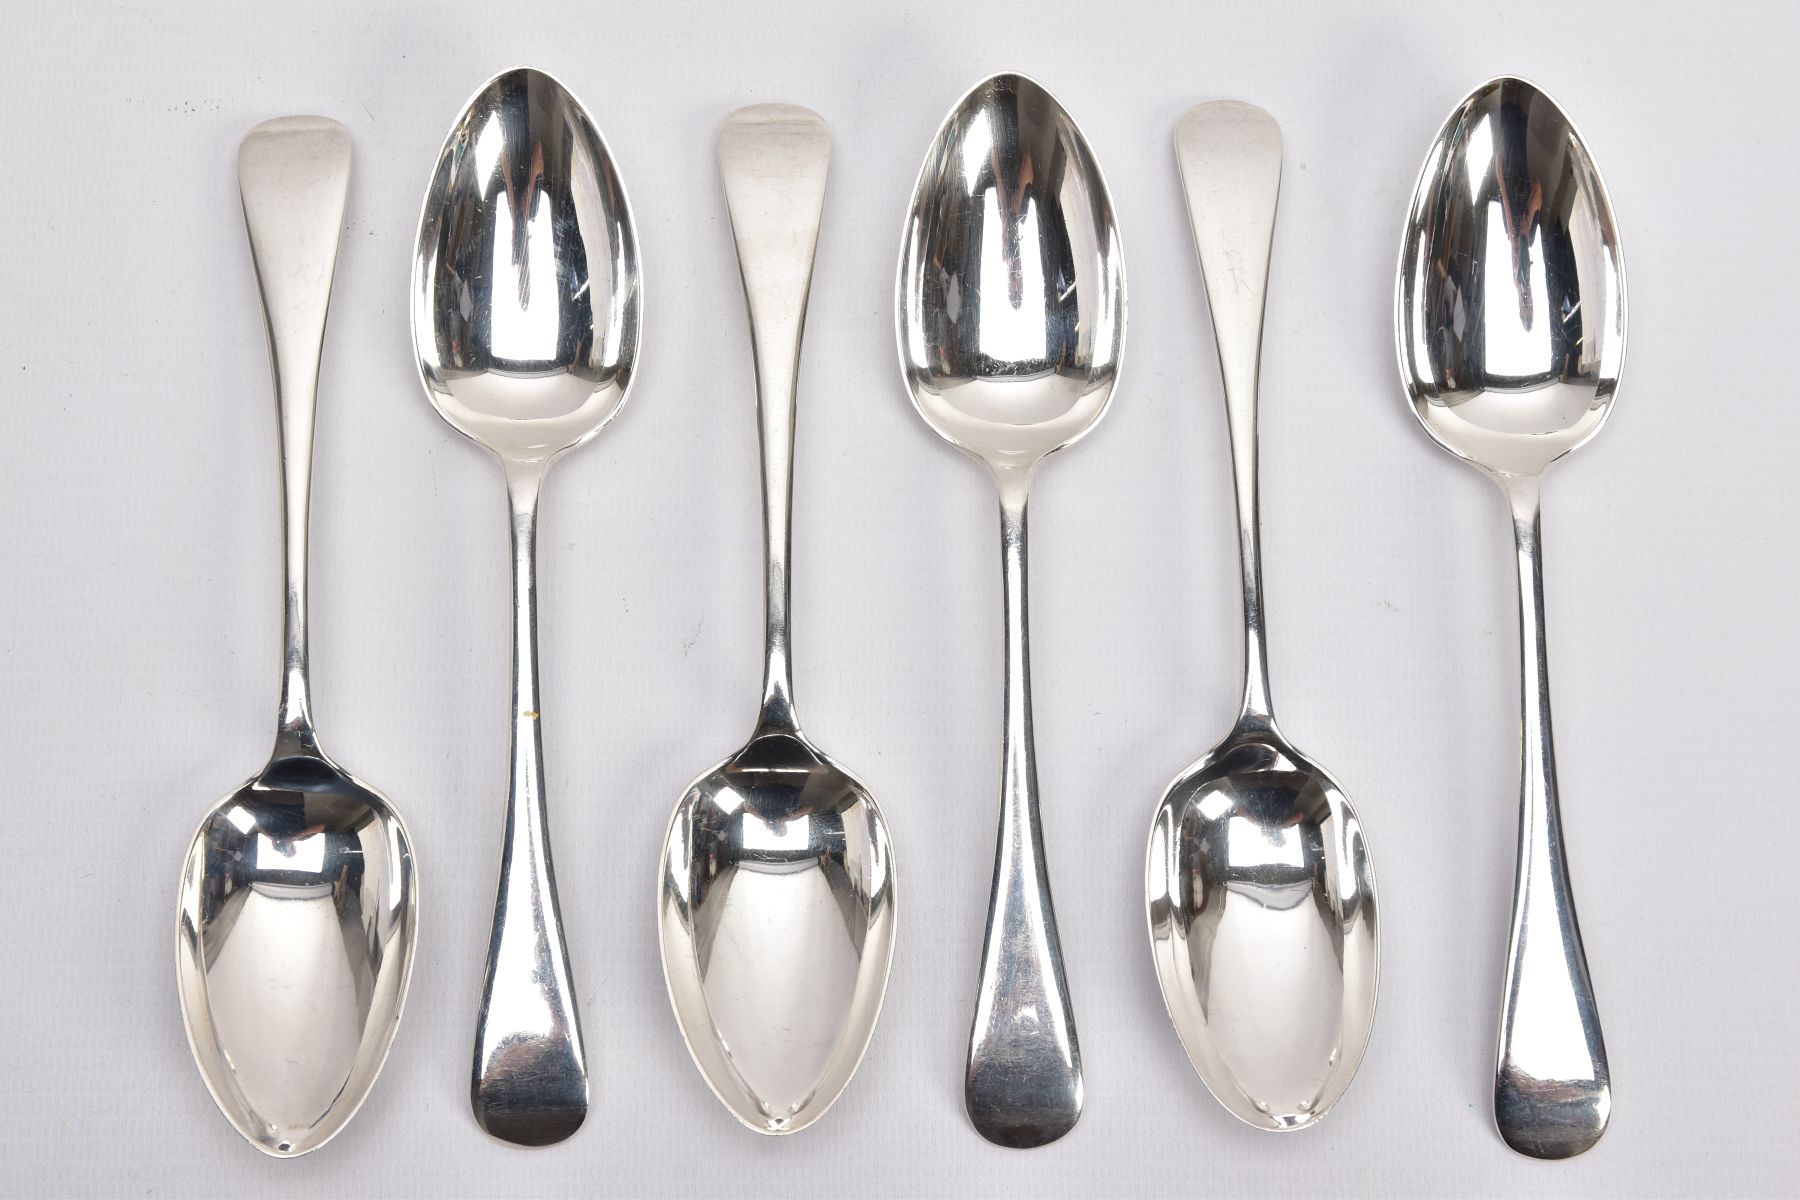 SIX SILVER TABLESPOONS, Old English pattern tablespoons, five hallmarked 'Cooper Brothers & Sons